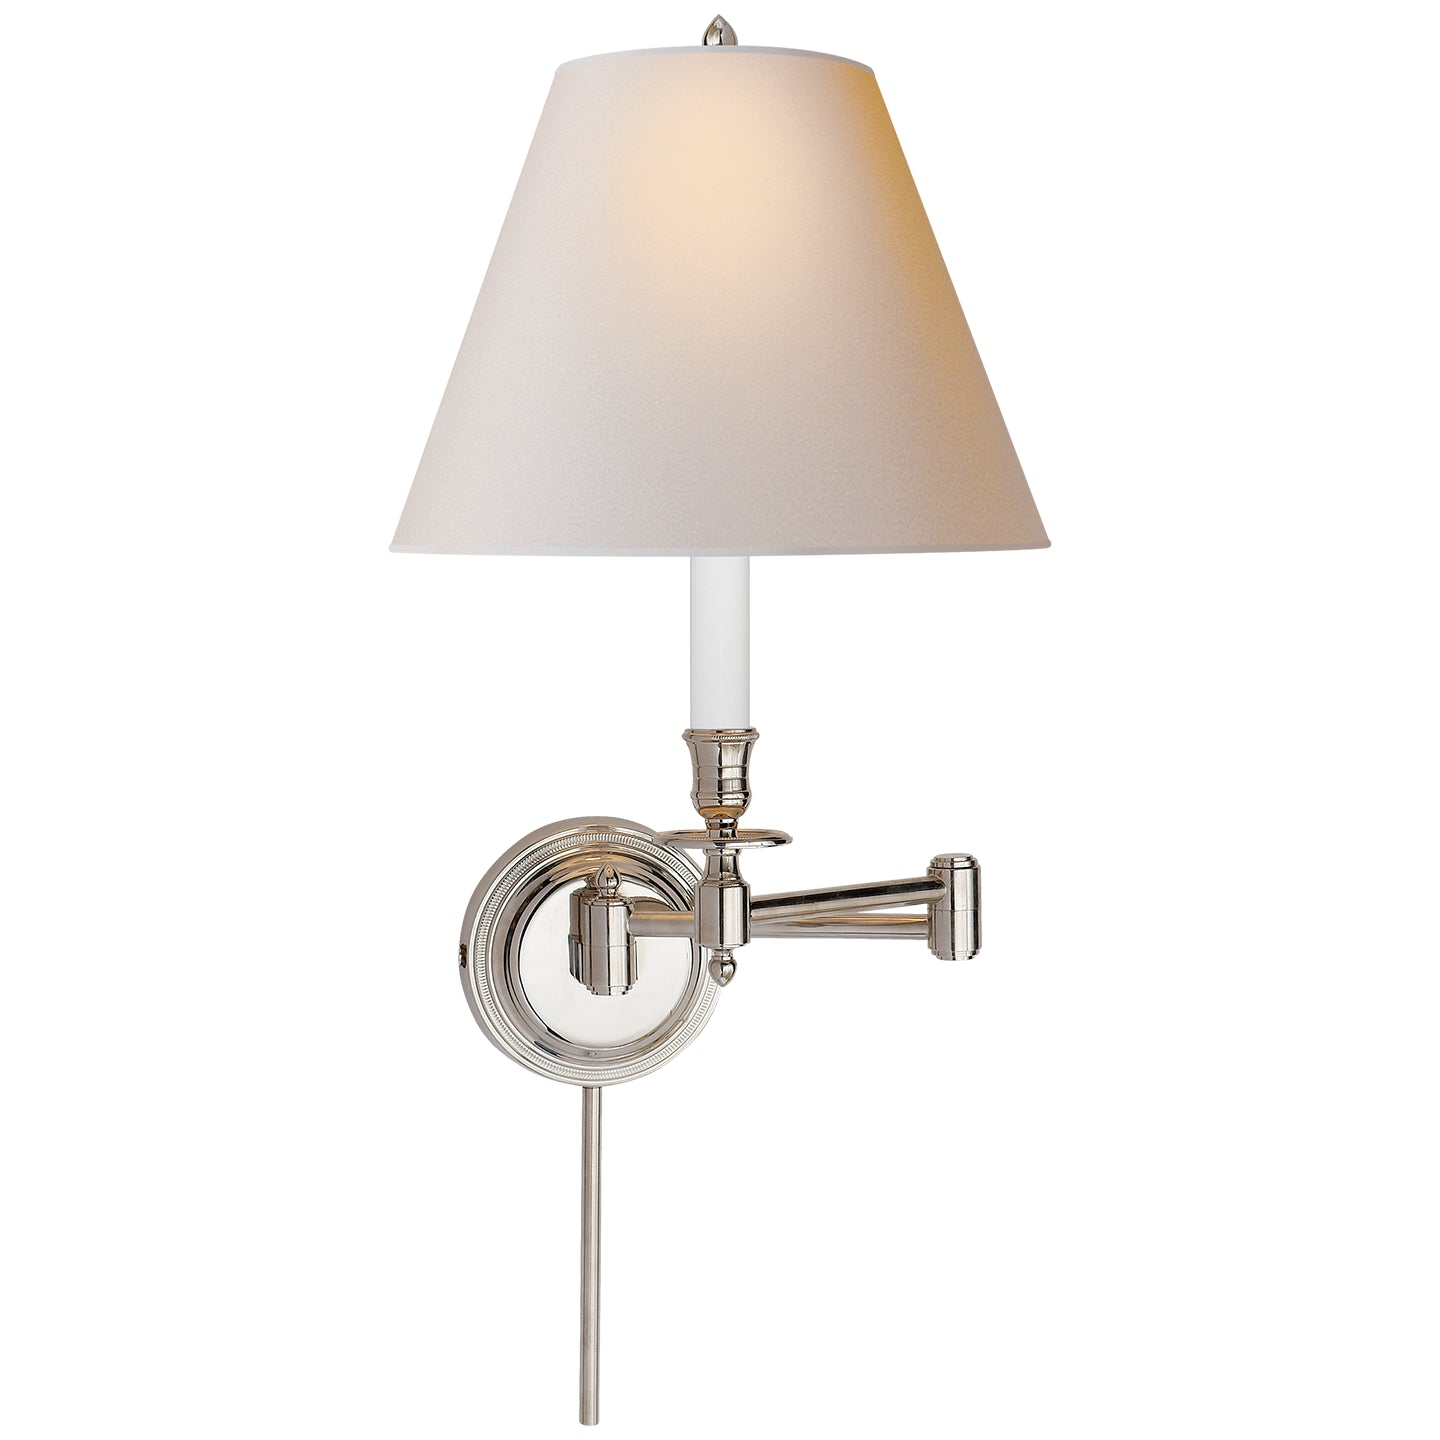 Load image into Gallery viewer, Visual Comfort Signature - S 2010PN-NP - One Light Wall Sconce - Candle Stick - Polished Nickel
